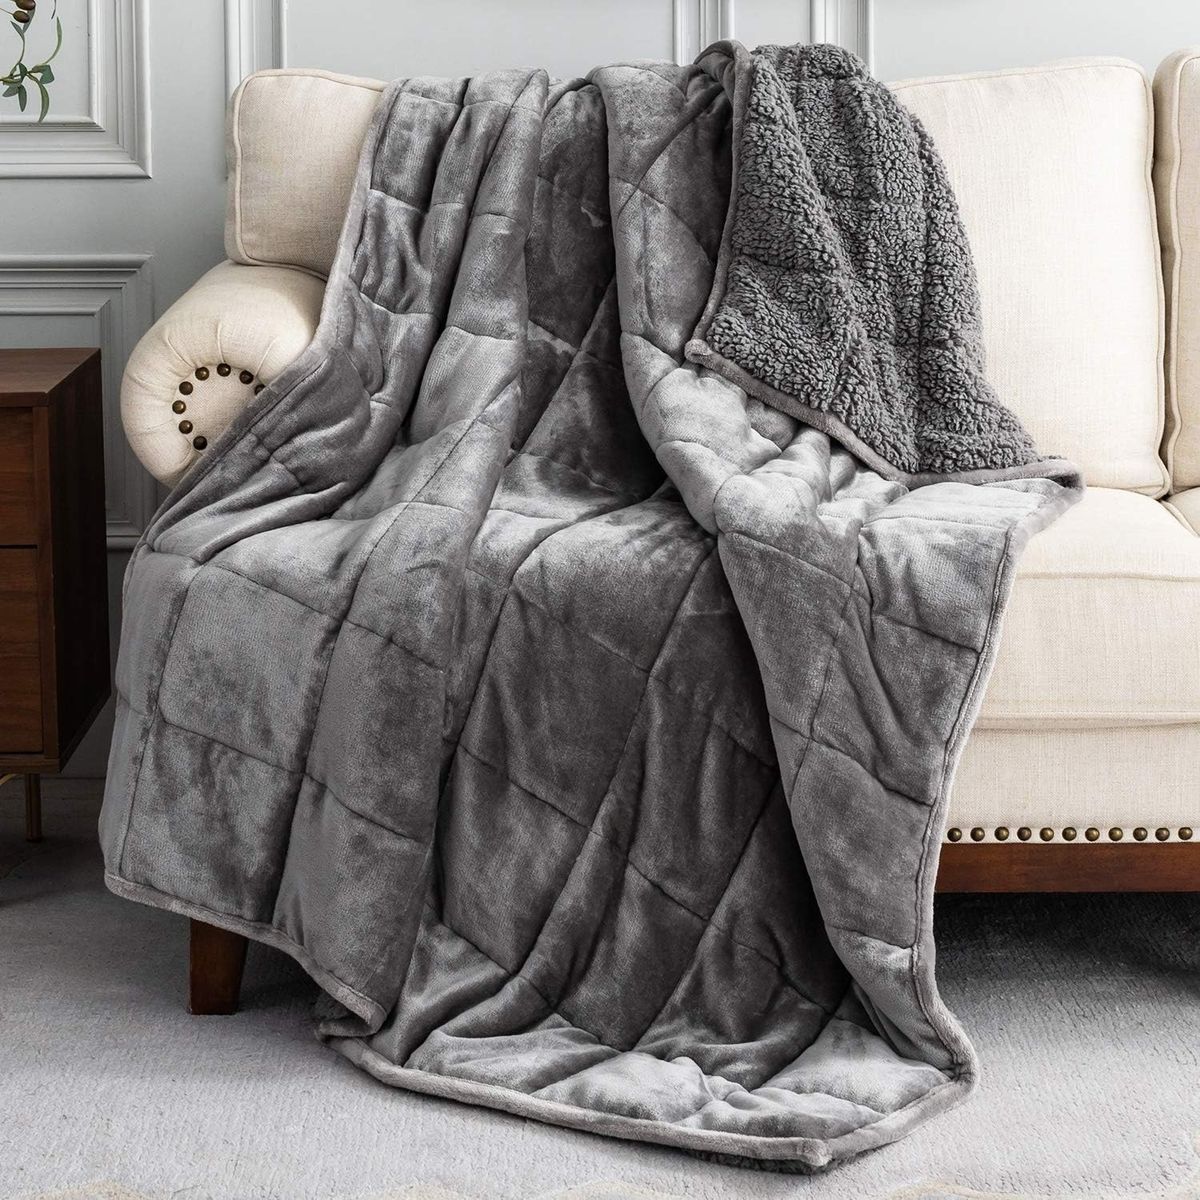 Cozy Up: The Ultimate Winter Comfort Guide for Snuggle Season